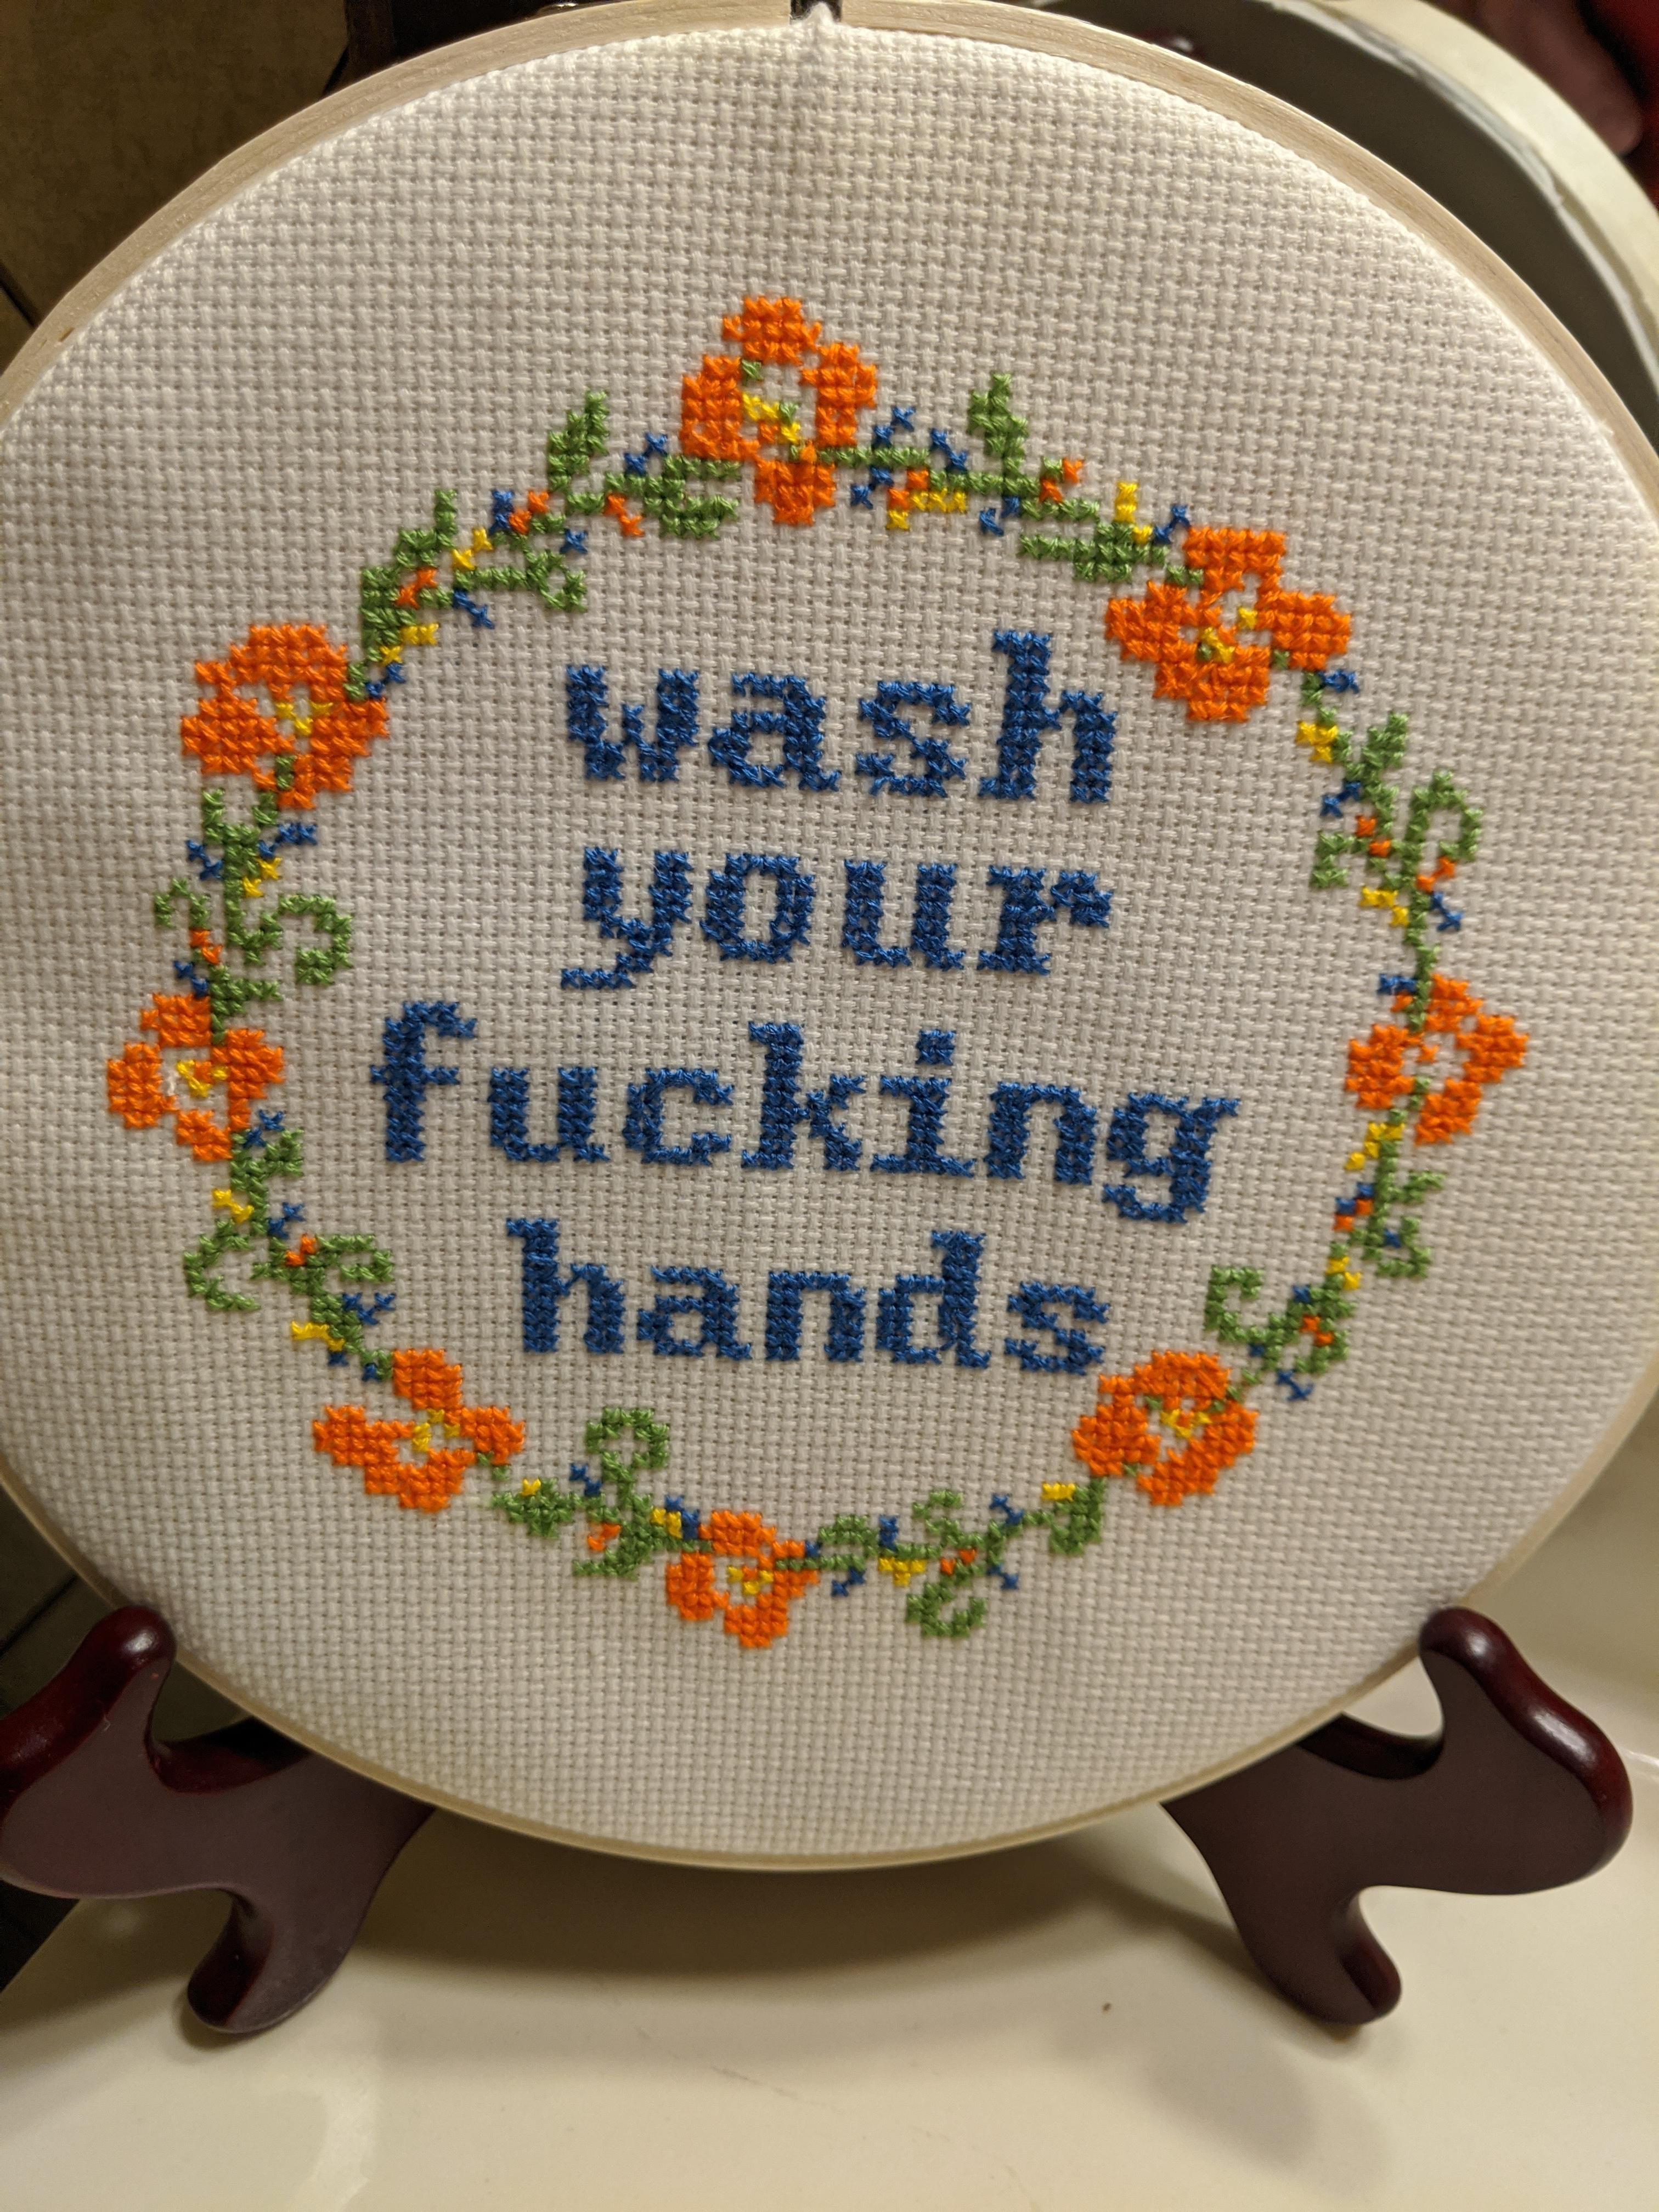 Needlepoint in my mother-in-law's bathroom...